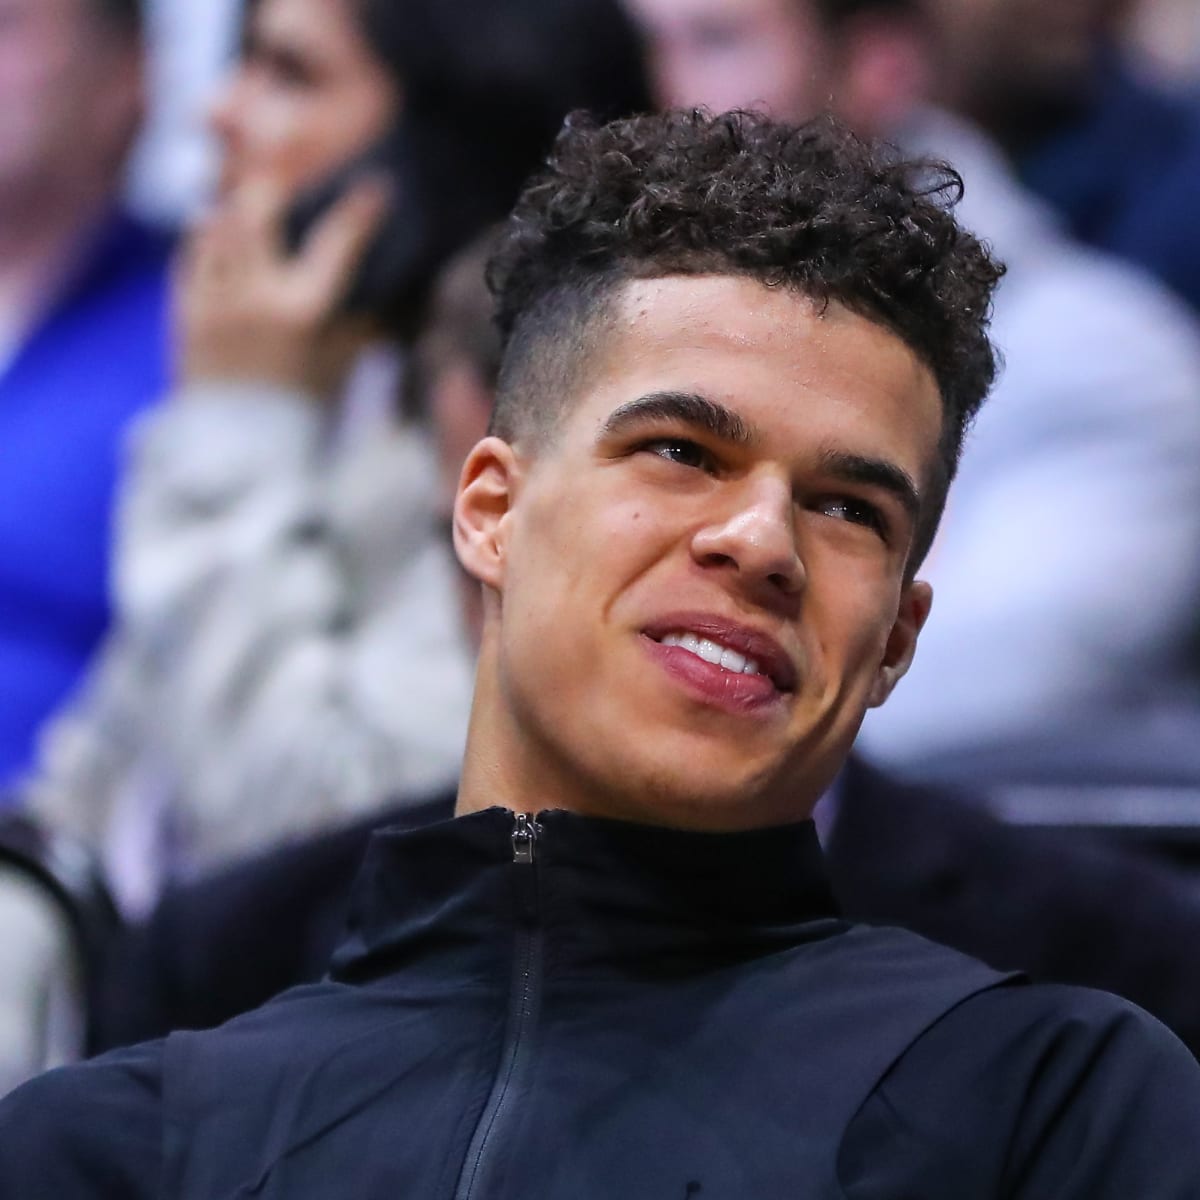 NBA Draft Rumors 2018: Michael Porter Jr. has strained hip, cancels pro day  (report) 